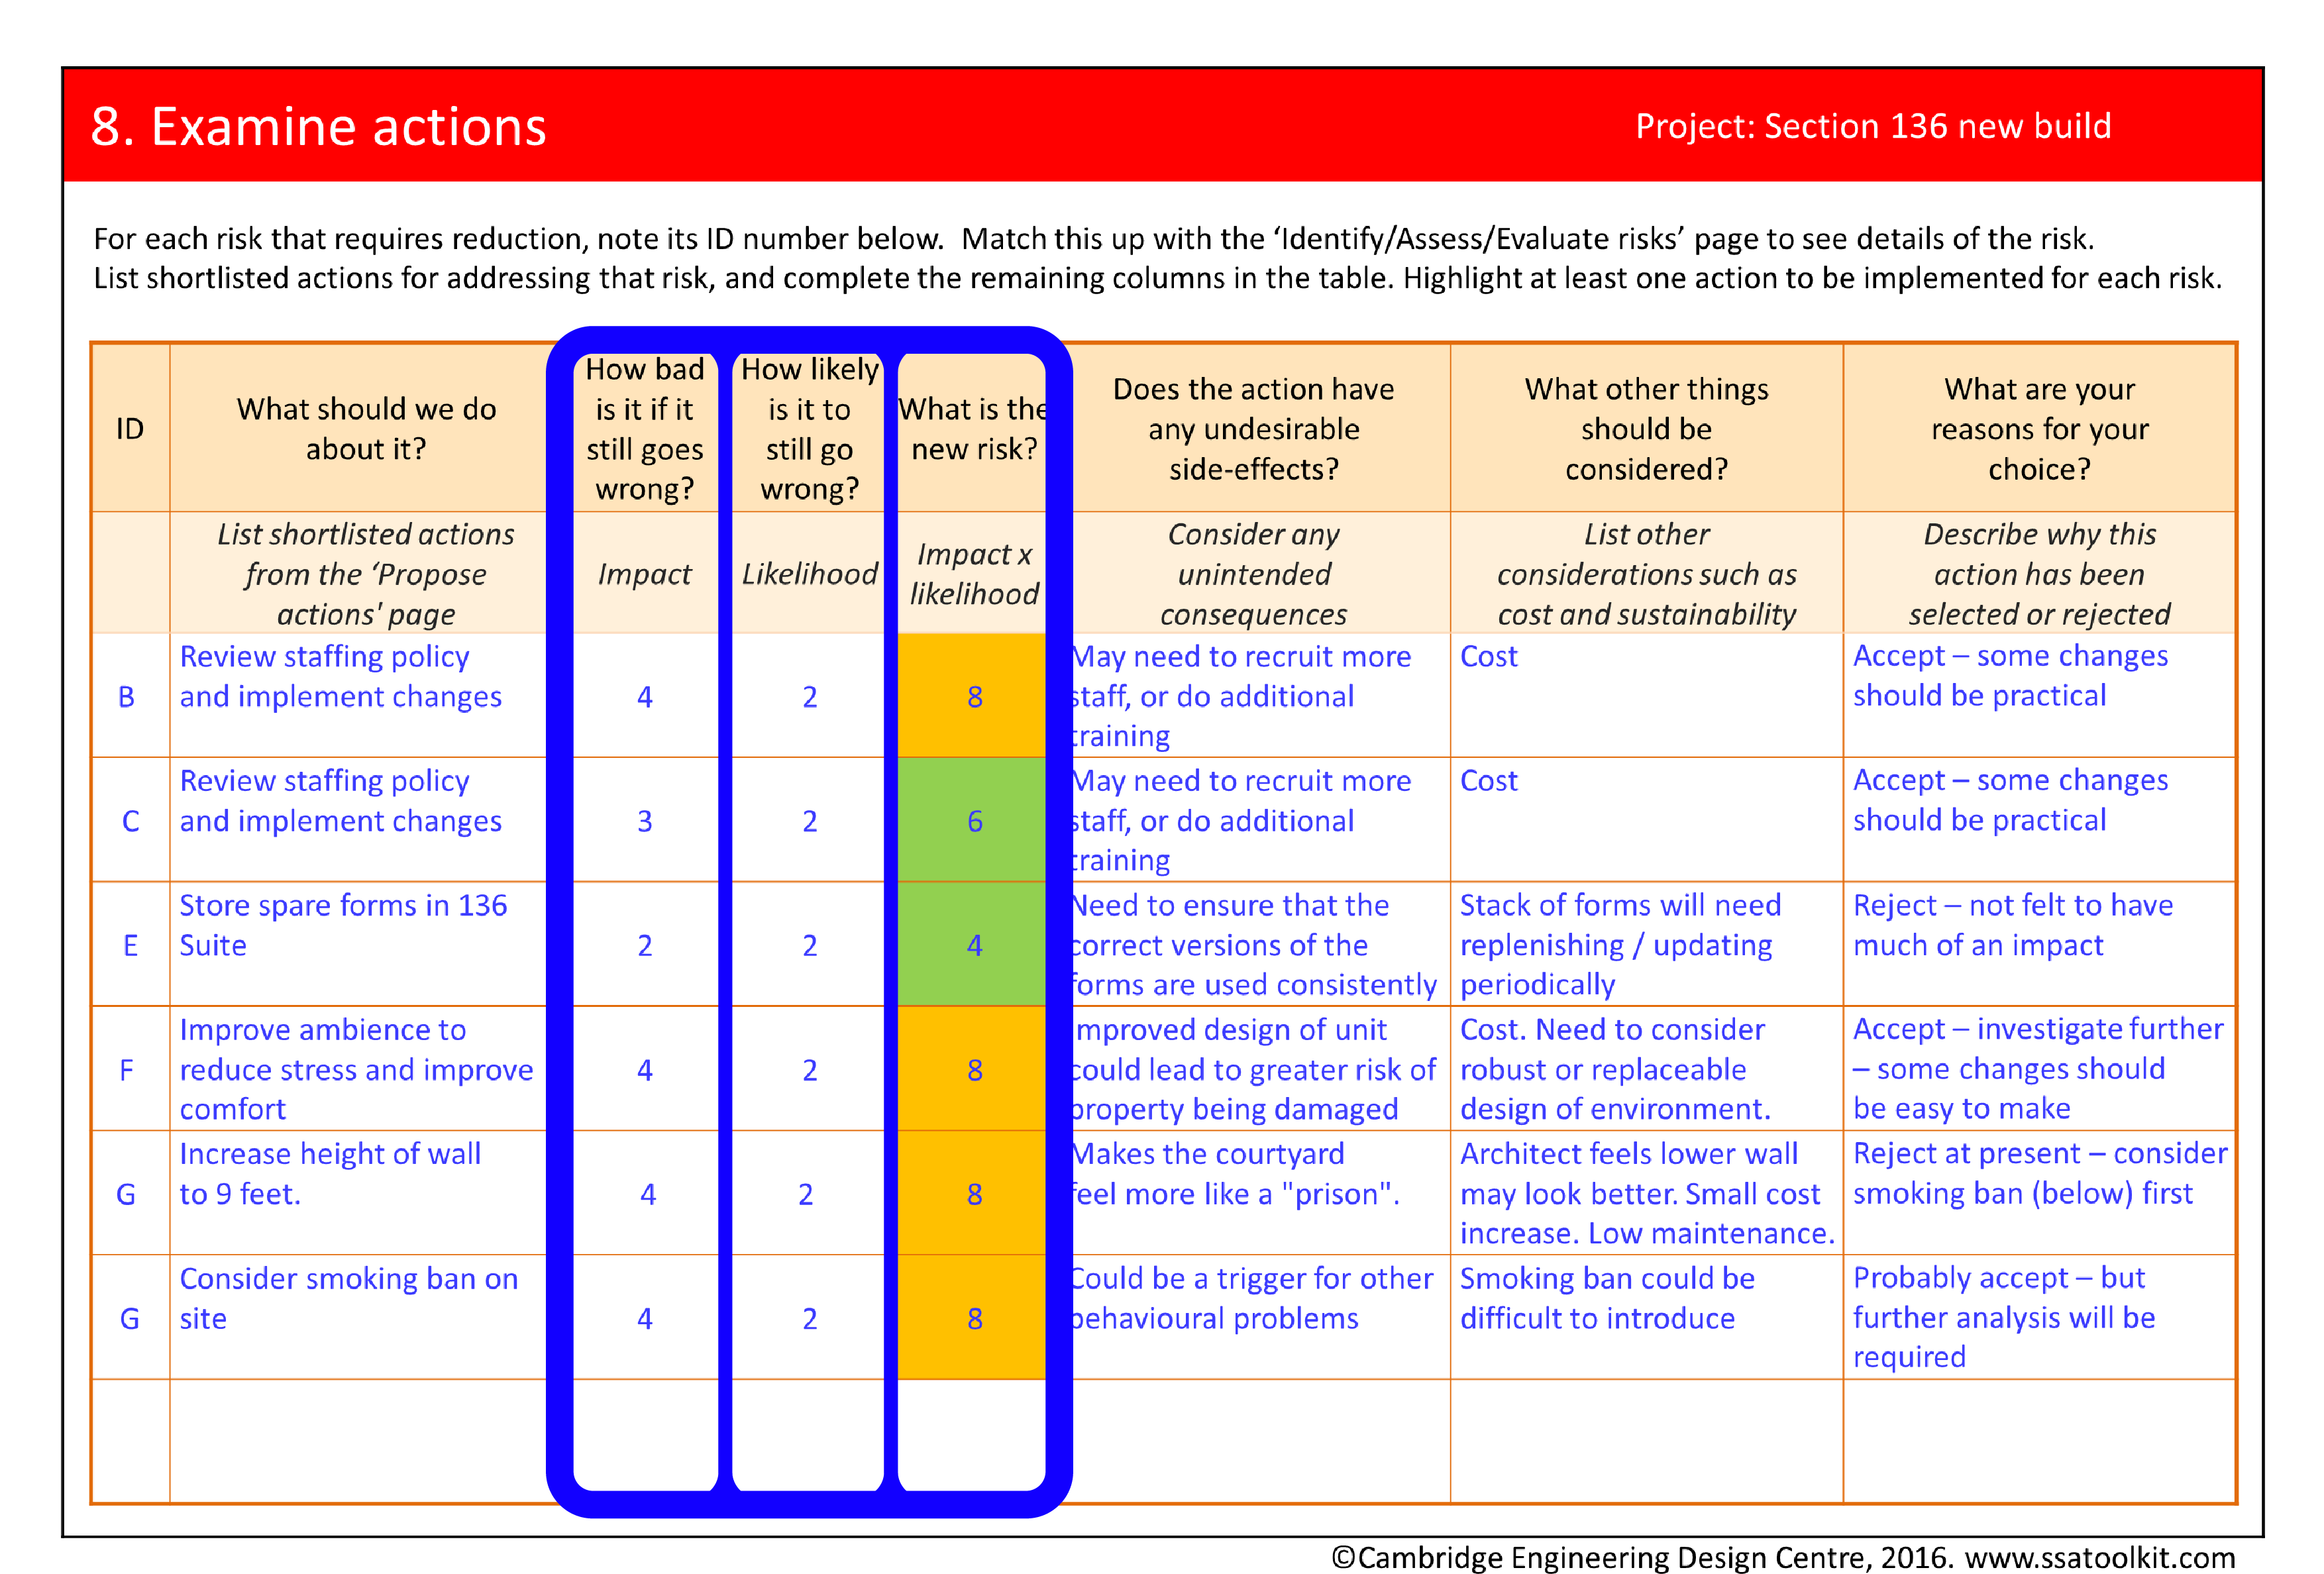 Screenshot of the Examine actions page from the Section 136 case study. The columns containing the new ratings for impact, likelihood and risk are circled. For example, it is estimated that a risk B could be reduced to 8 by reviewing the staffing policy and implementing changes. The full form in pdf is available from the Resources page.